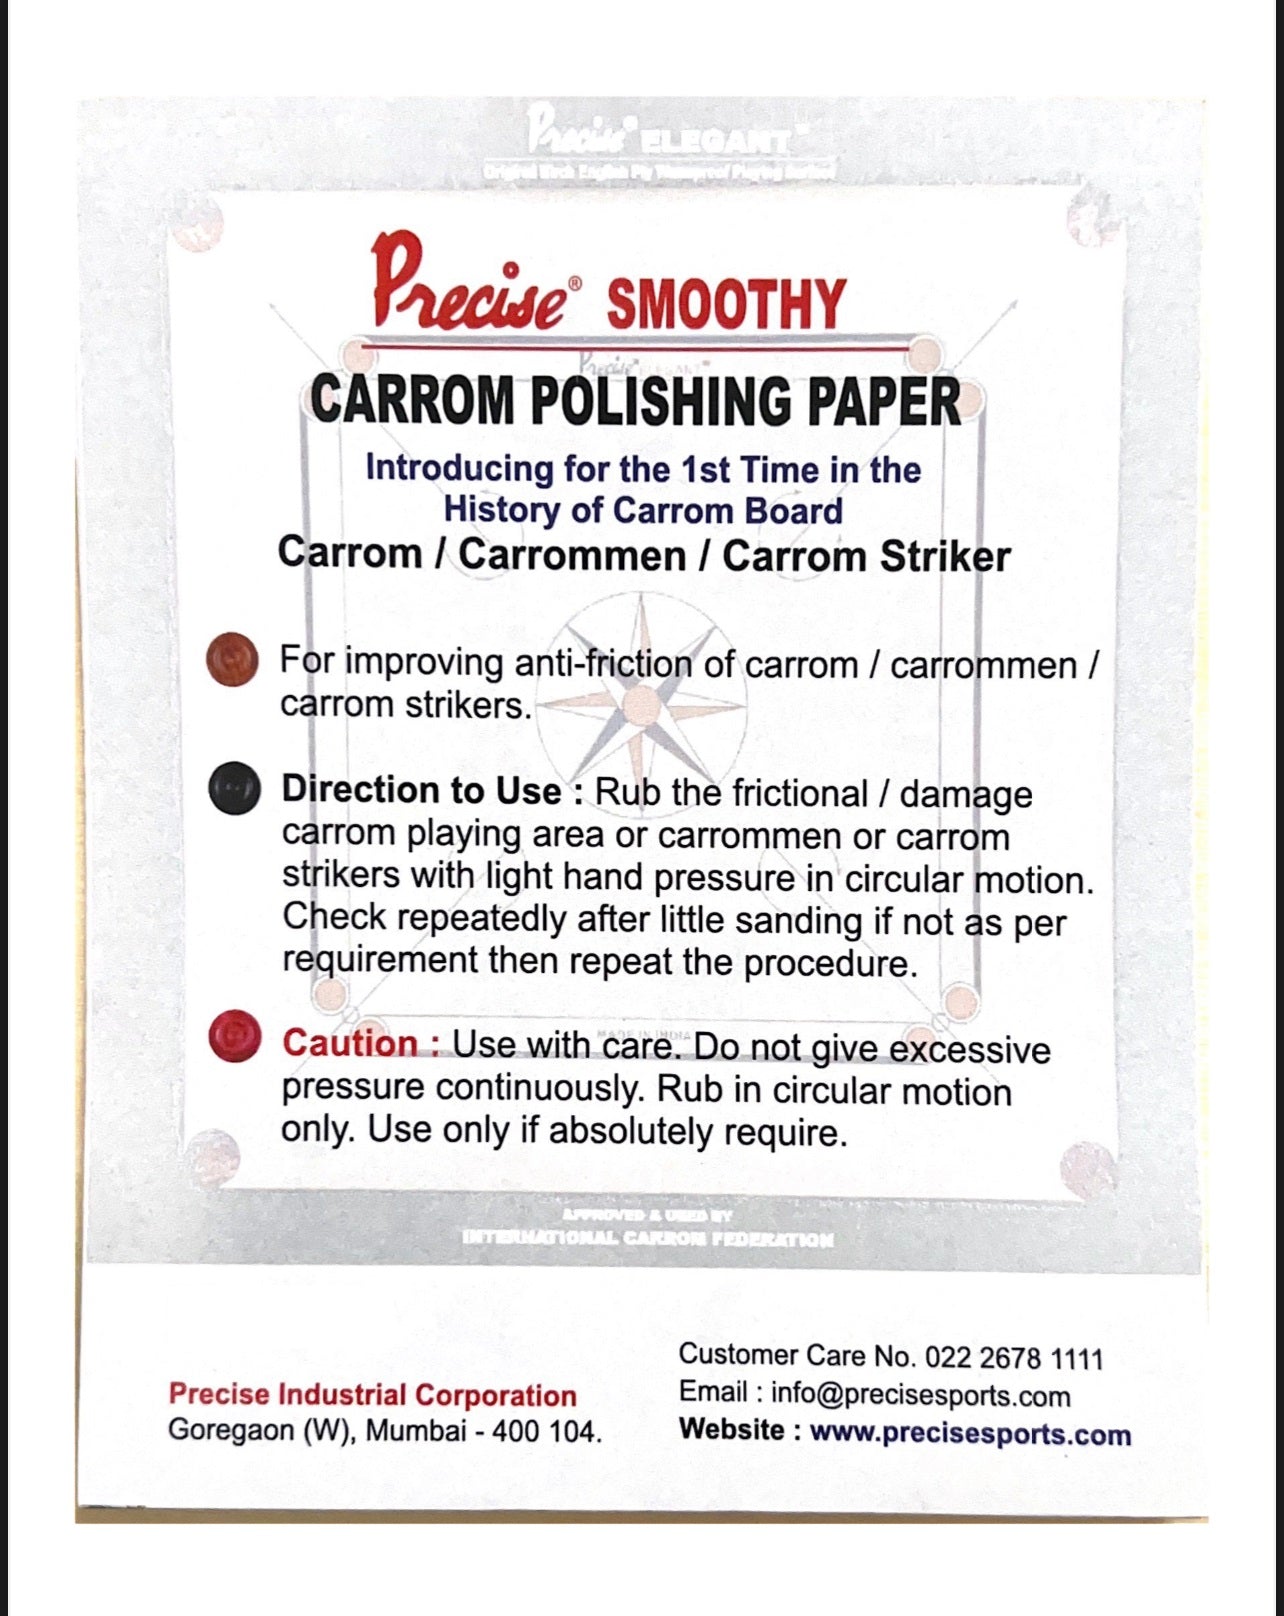 Pack of Precise Smoothy carrom polishing paper by Black Ash Sports, designed to improve the anti-friction qualities of carrom boards, carrommen, and carrom strikers for smoother play.